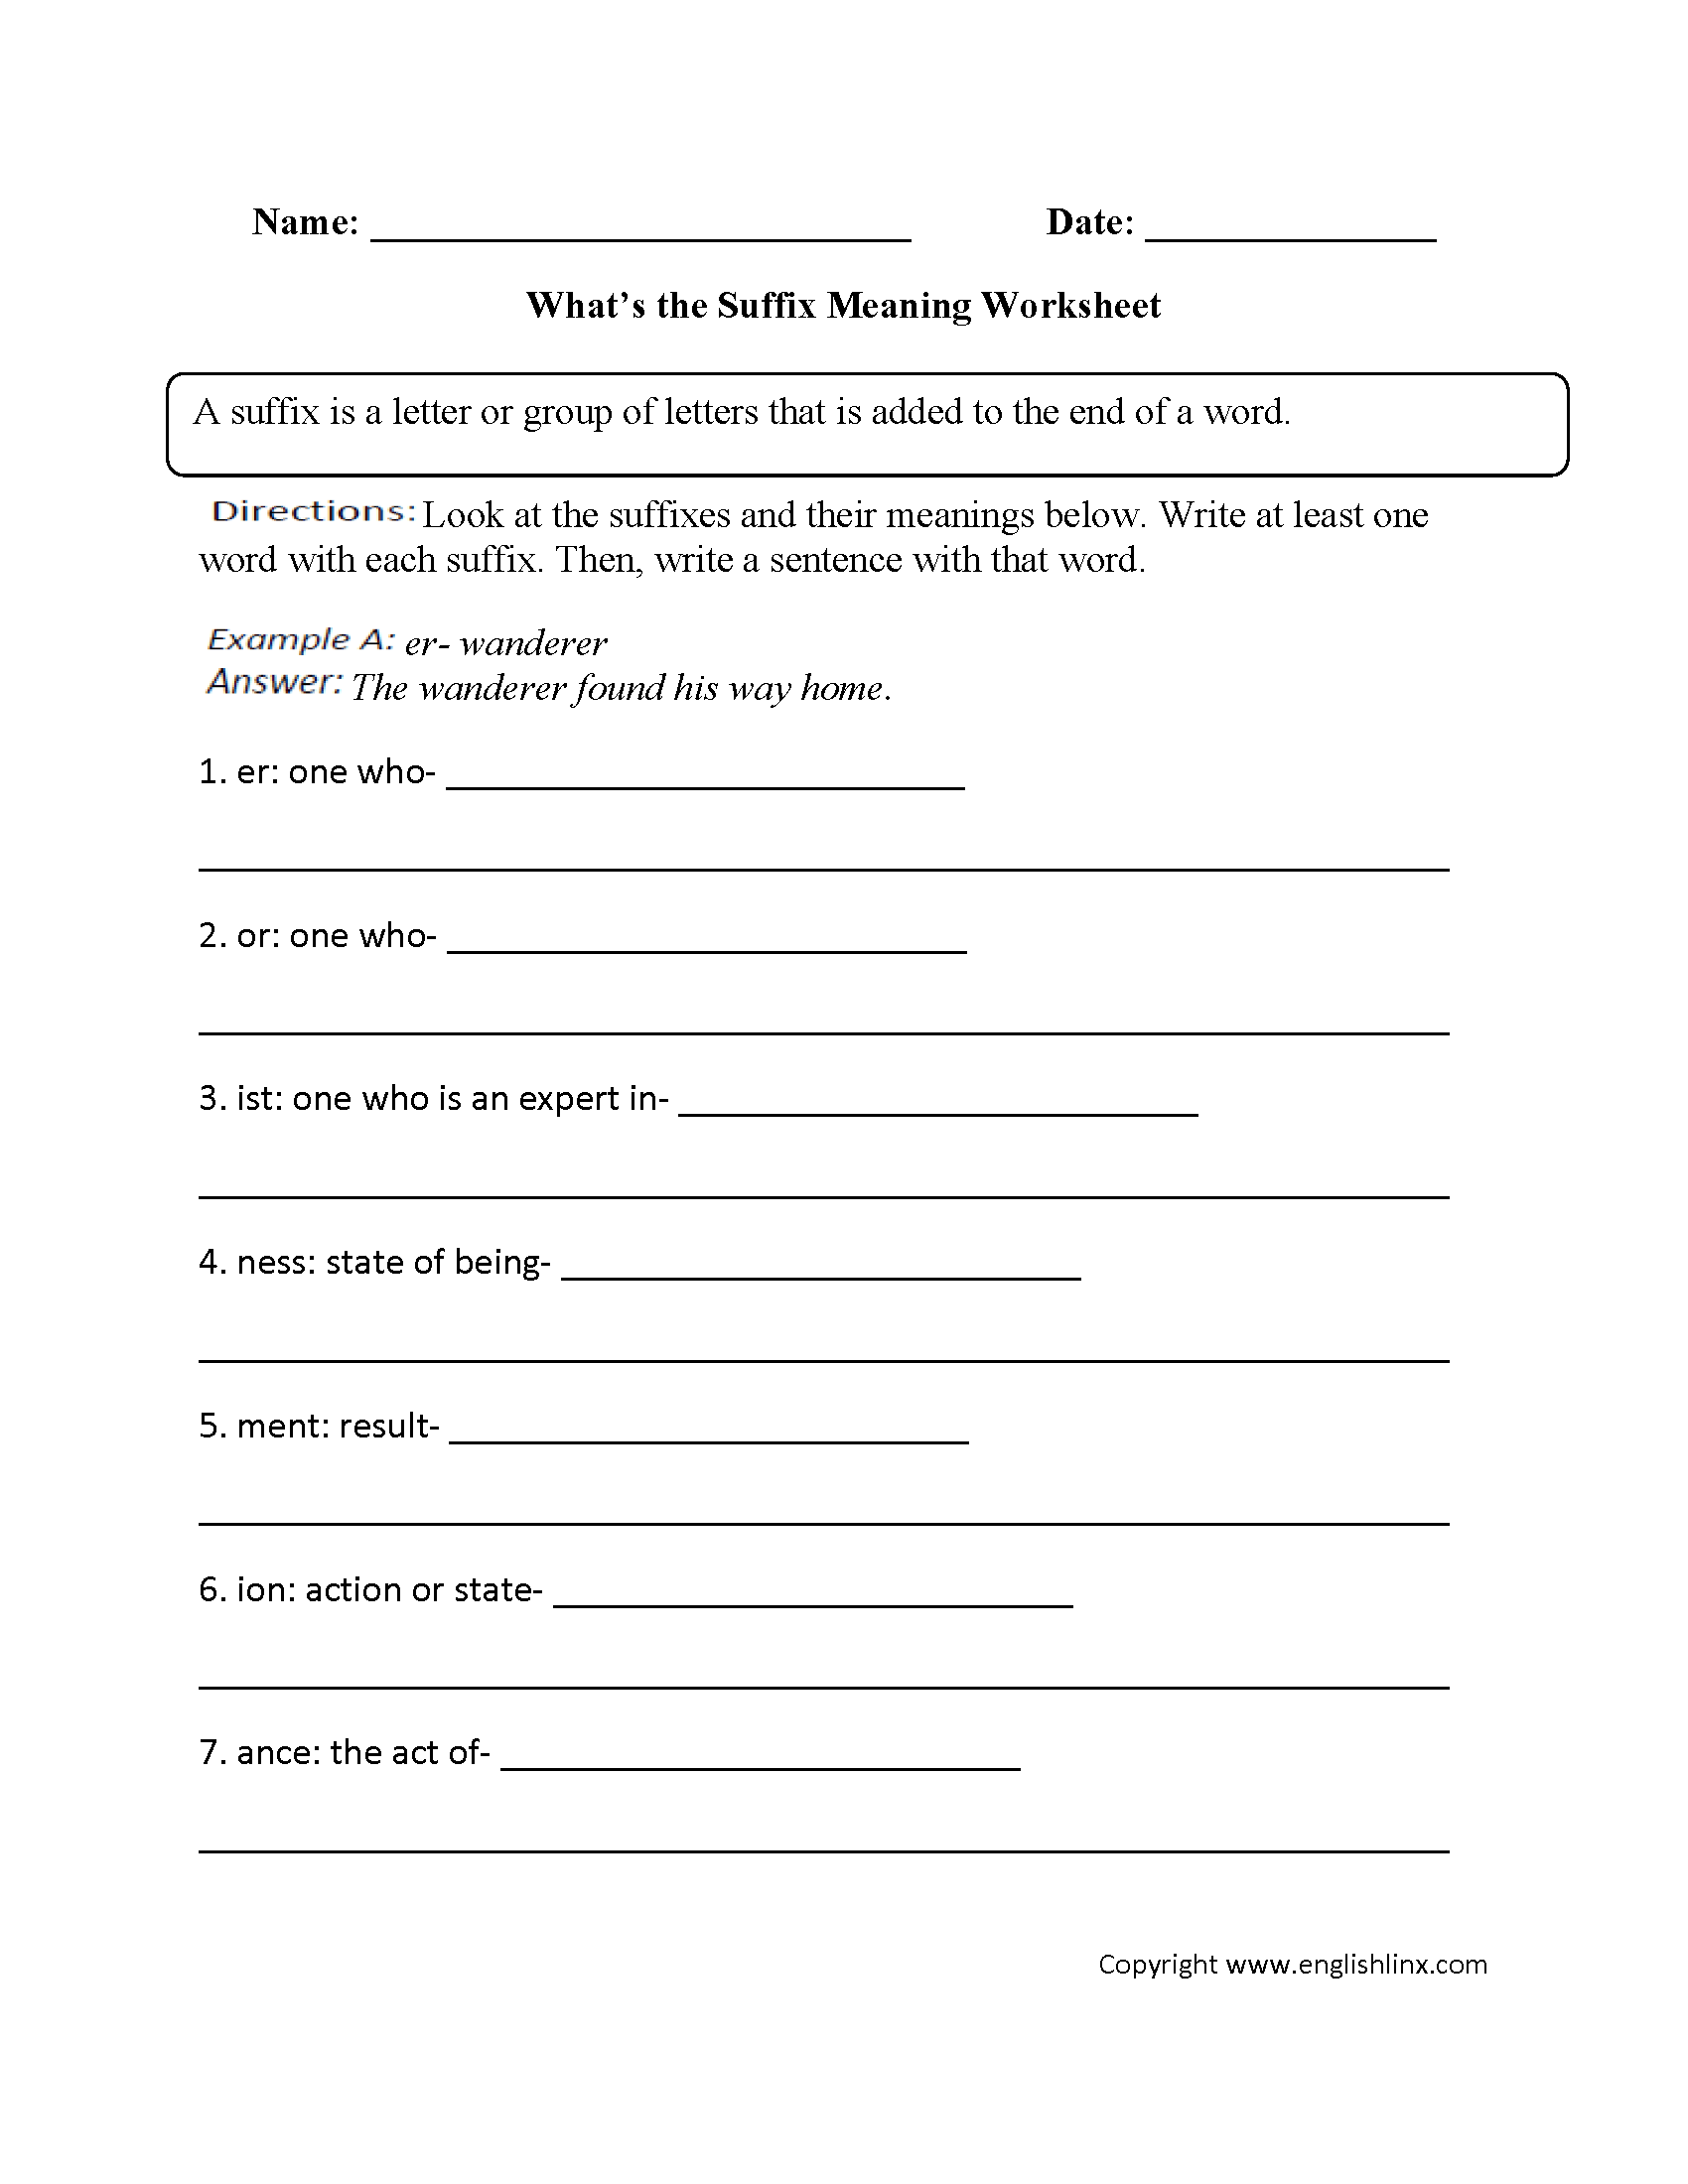 What's the Suffix Meaning? Worksheet